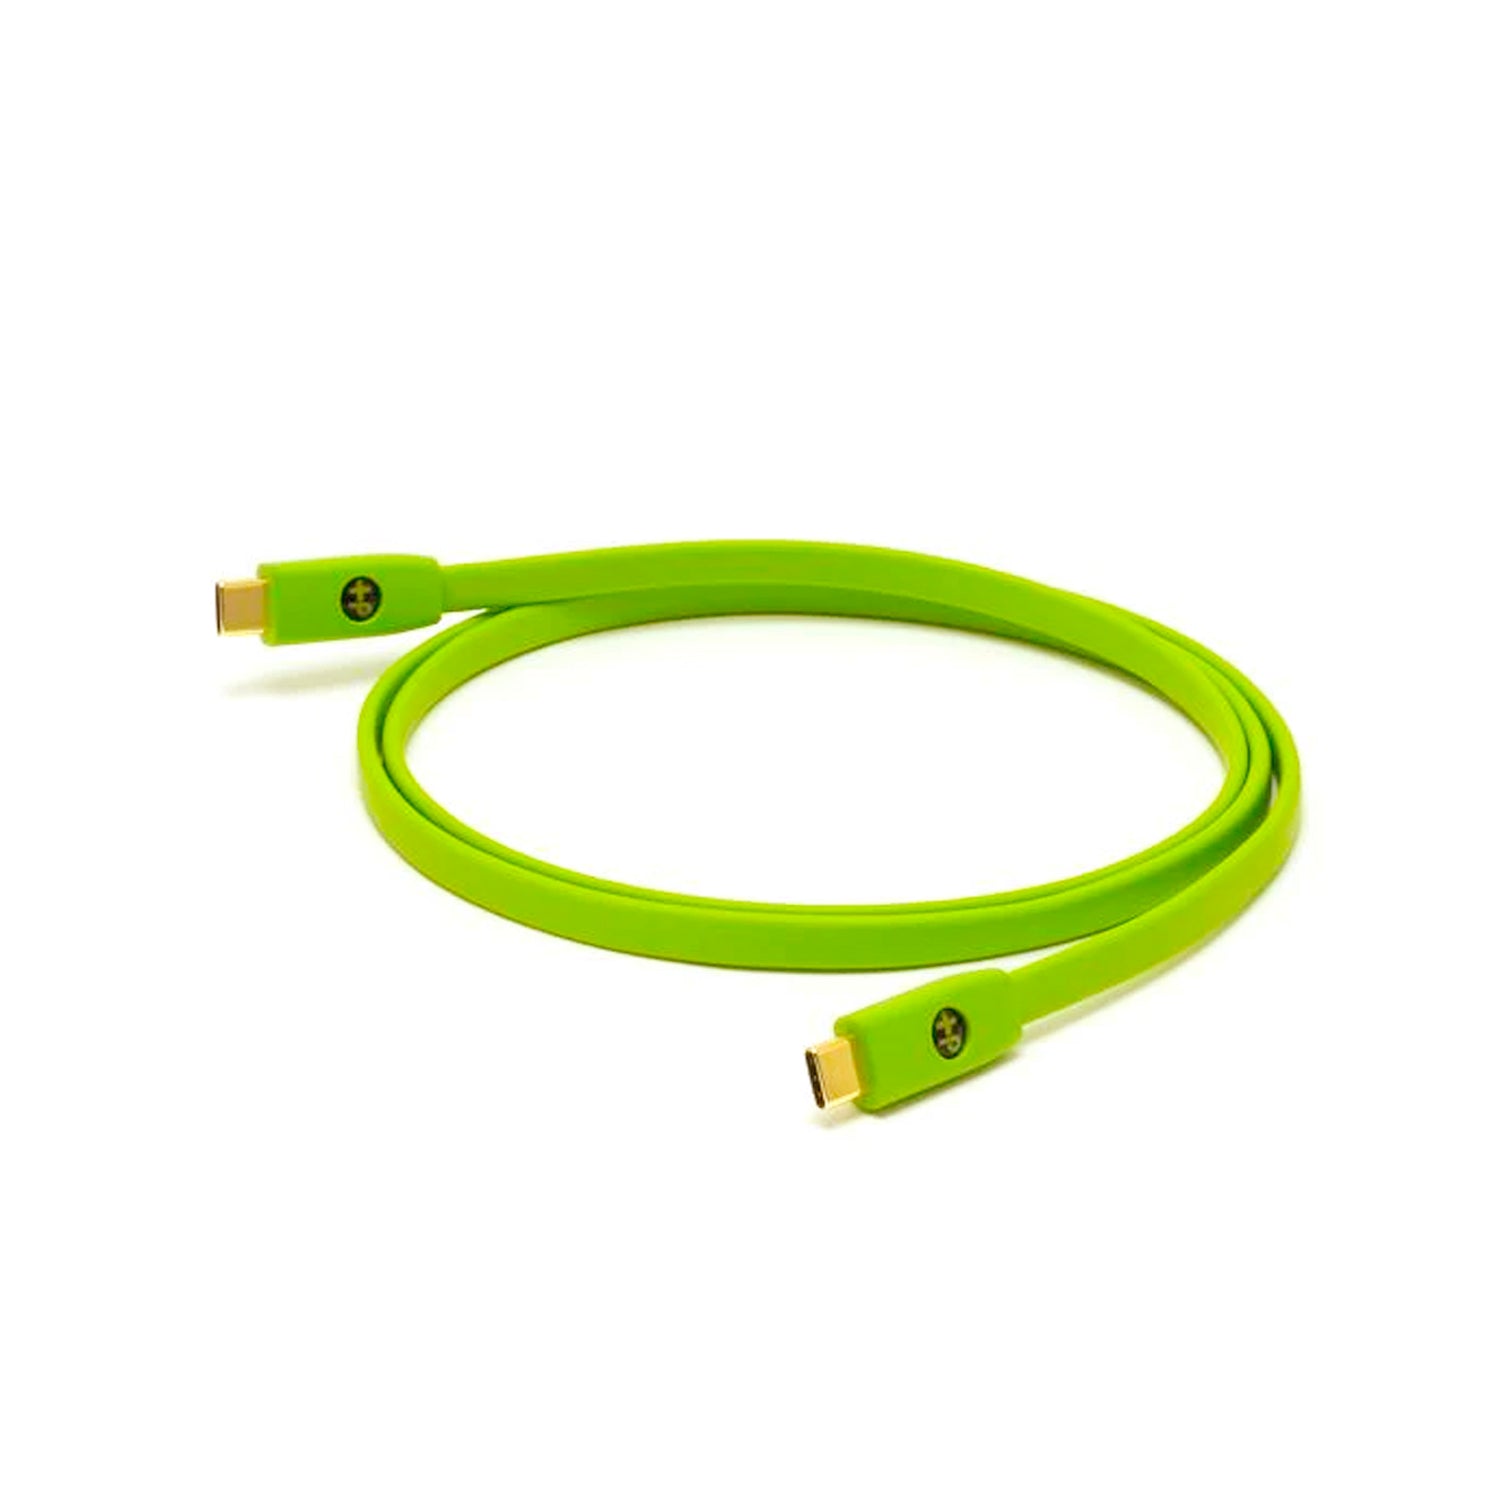 Oyaide NEO d+ Class B USB 2.0 Type-C to Type-C Cable